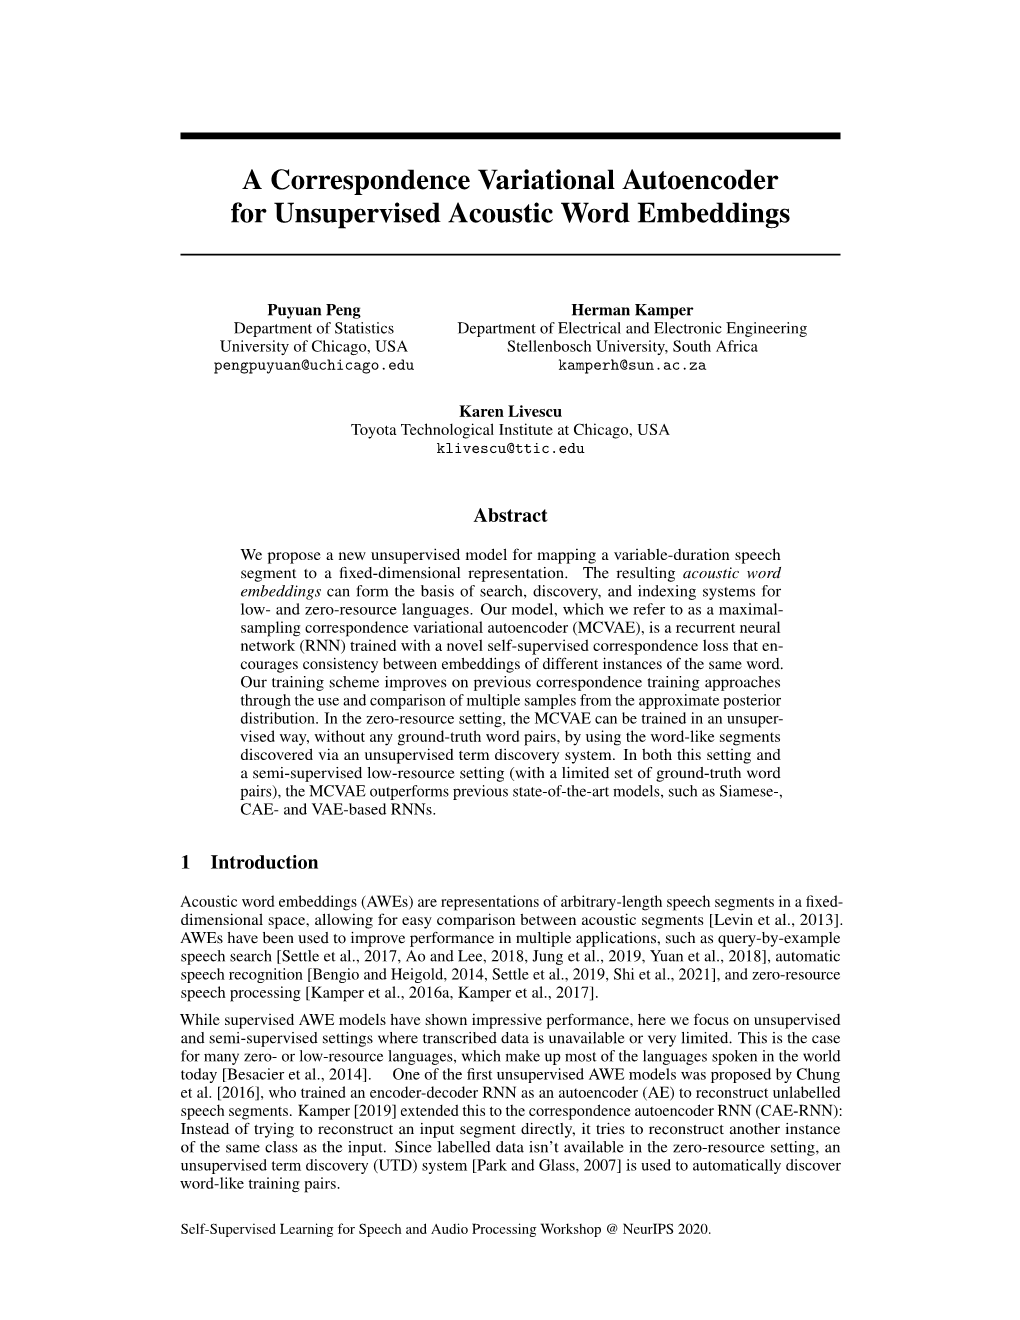 A Correspondence Variational Autoencoder for Unsupervised Acoustic Word Embeddings